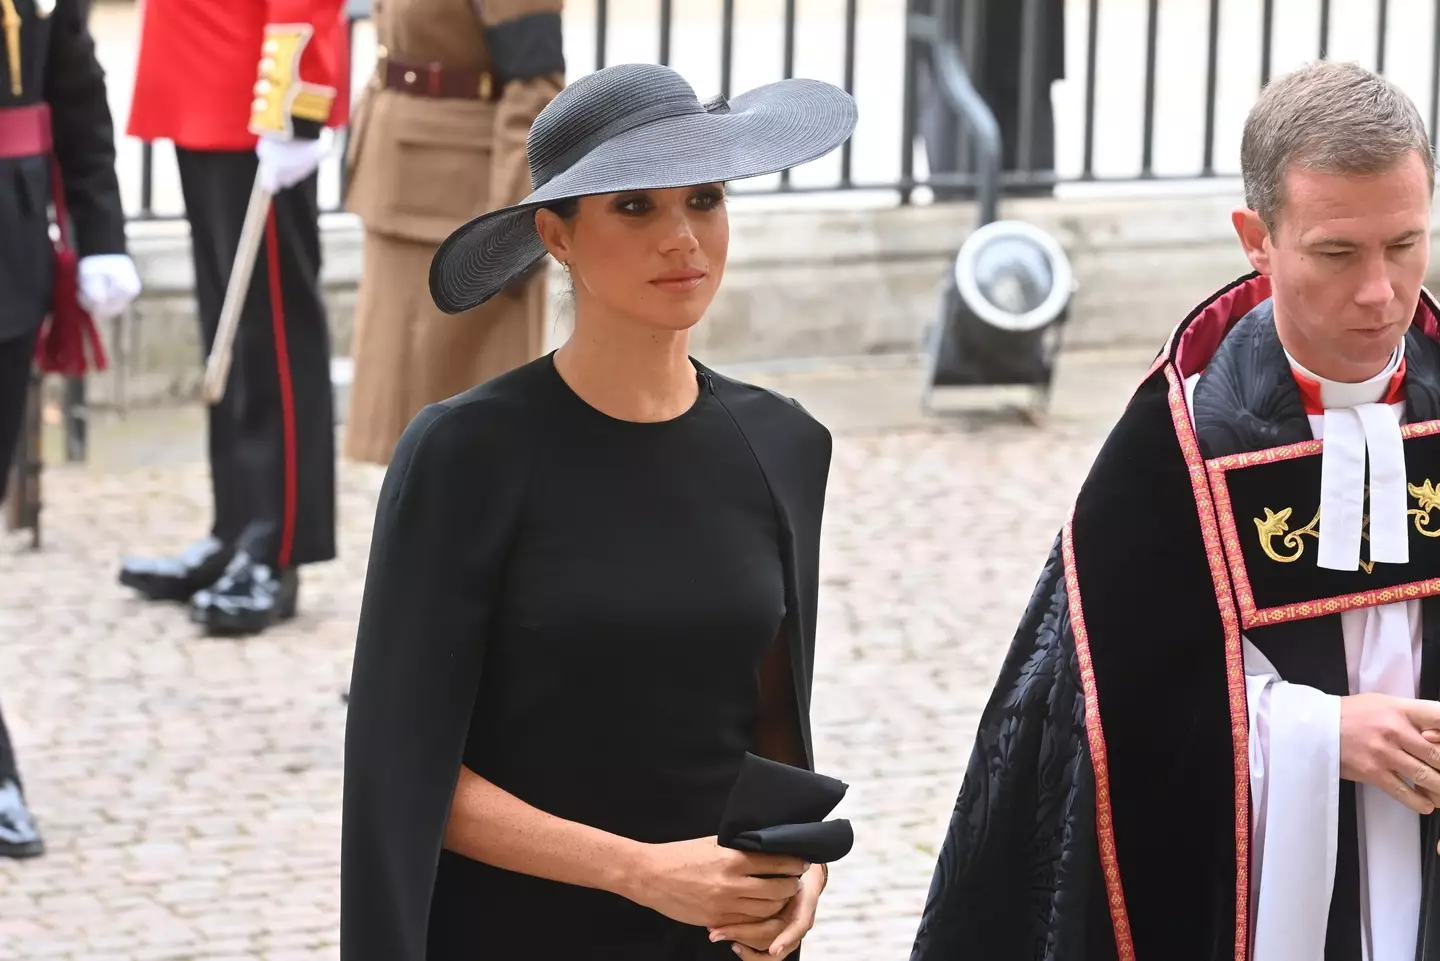 Meghan Markle paid two subtle tributes to the Queen during the funeral.